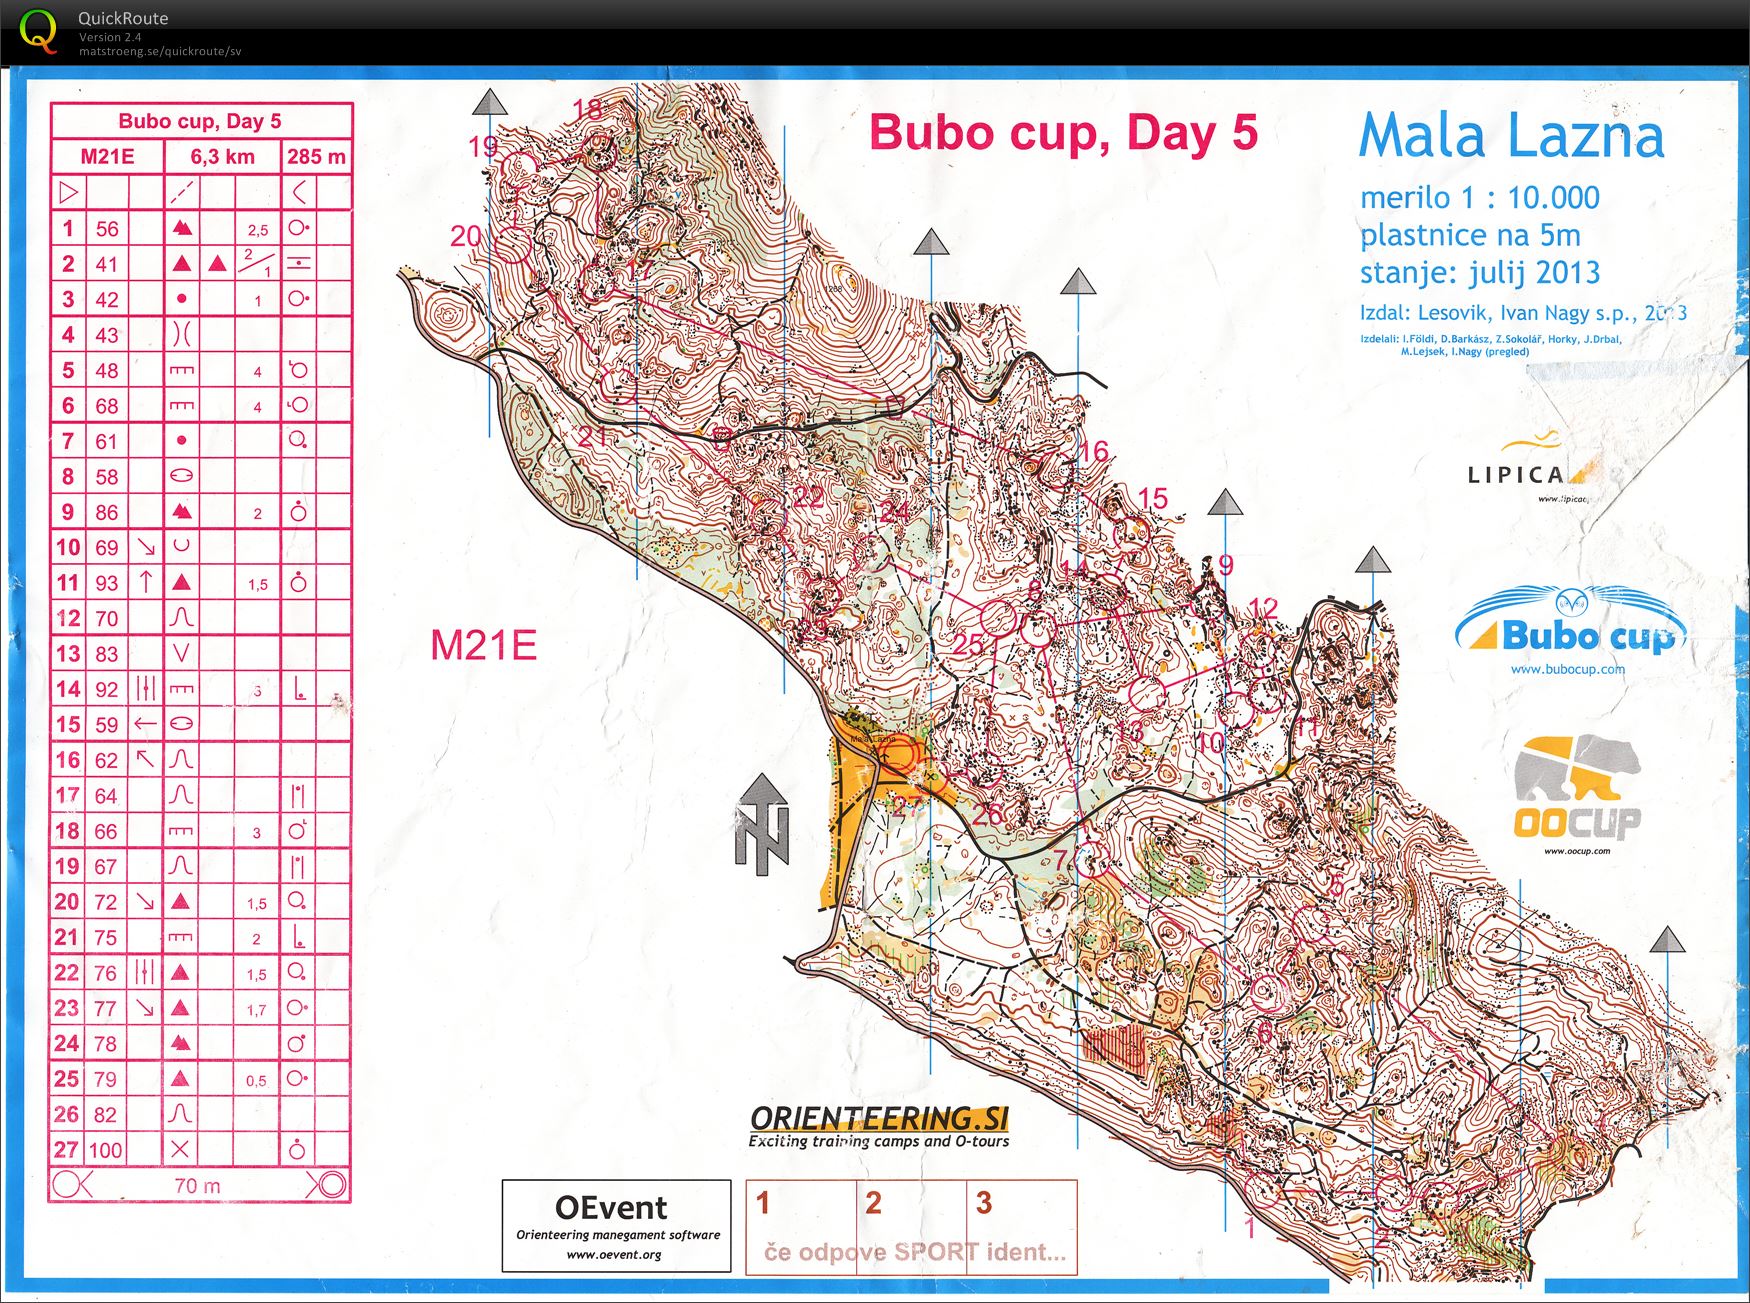 Bubo cup, Day 5 (23-07-2013)